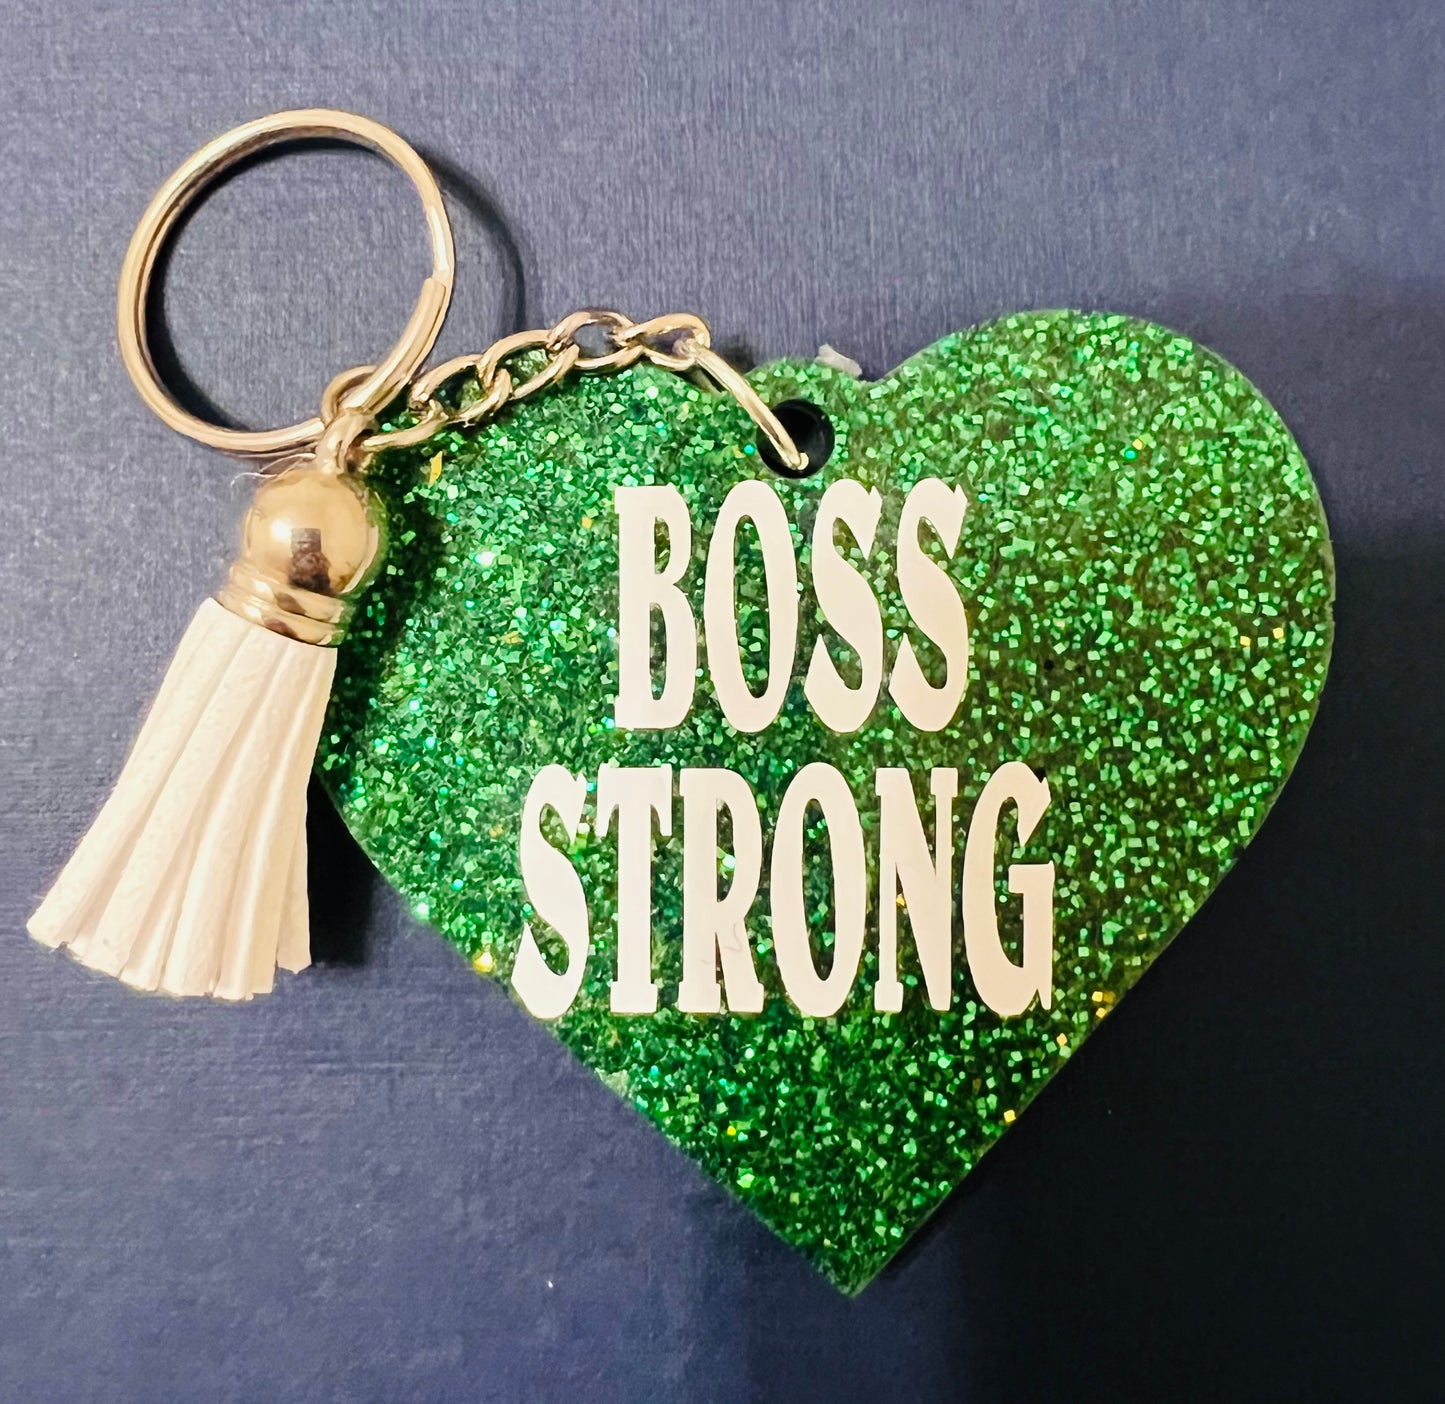 BOSS STRONG Keychain